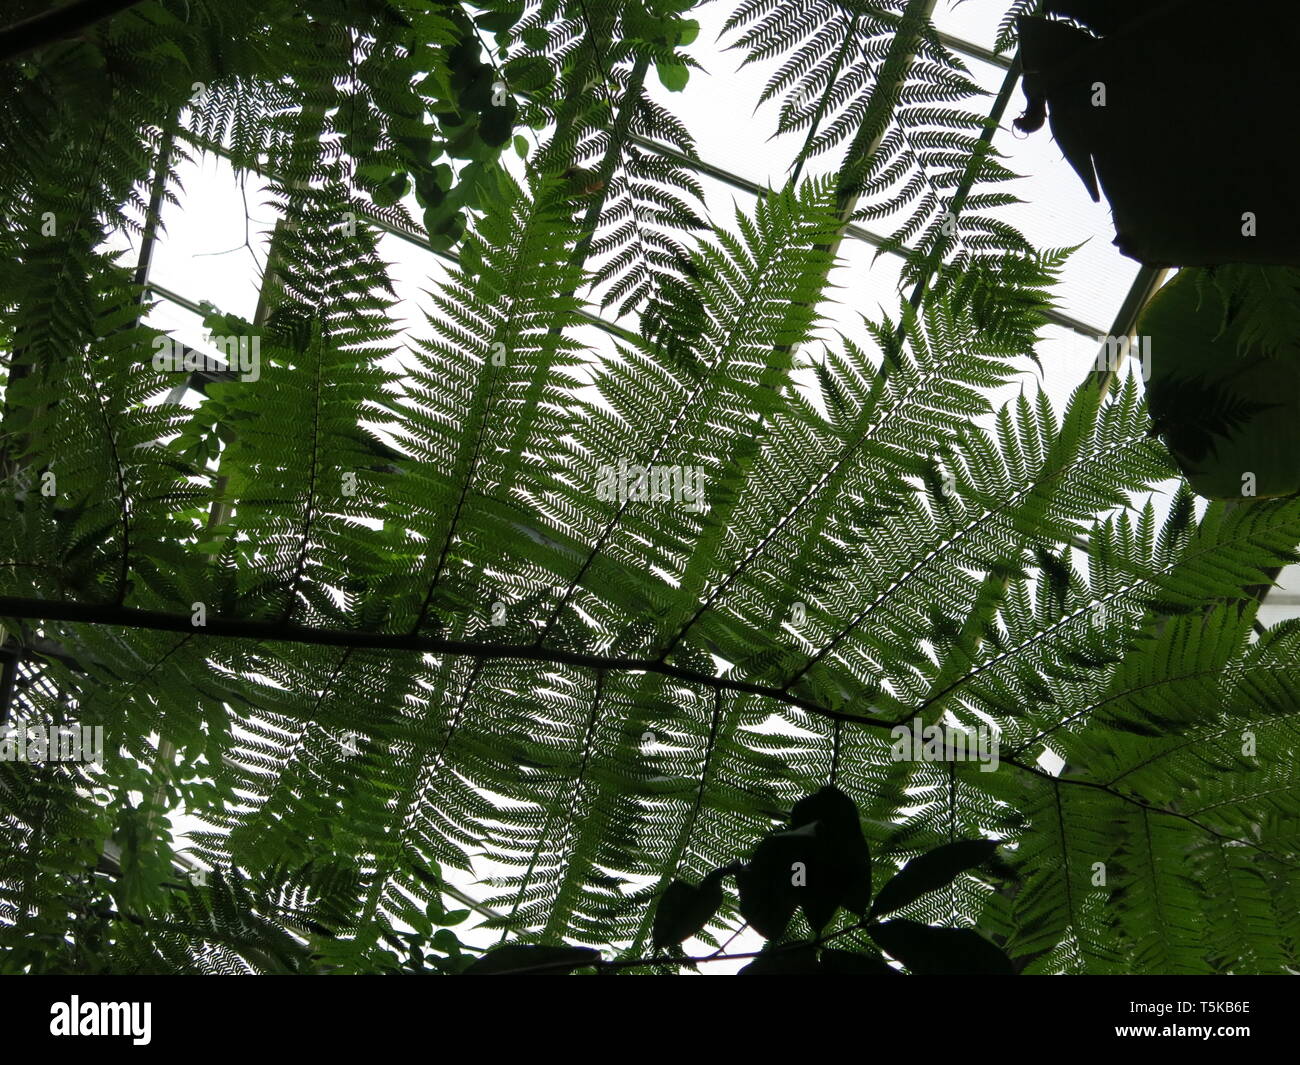 The leafy fronds of a large fern make an interesting abstract pattern against the glass ceiling panels in the Hothouse at Utrecht Botanic Gardens Stock Photo